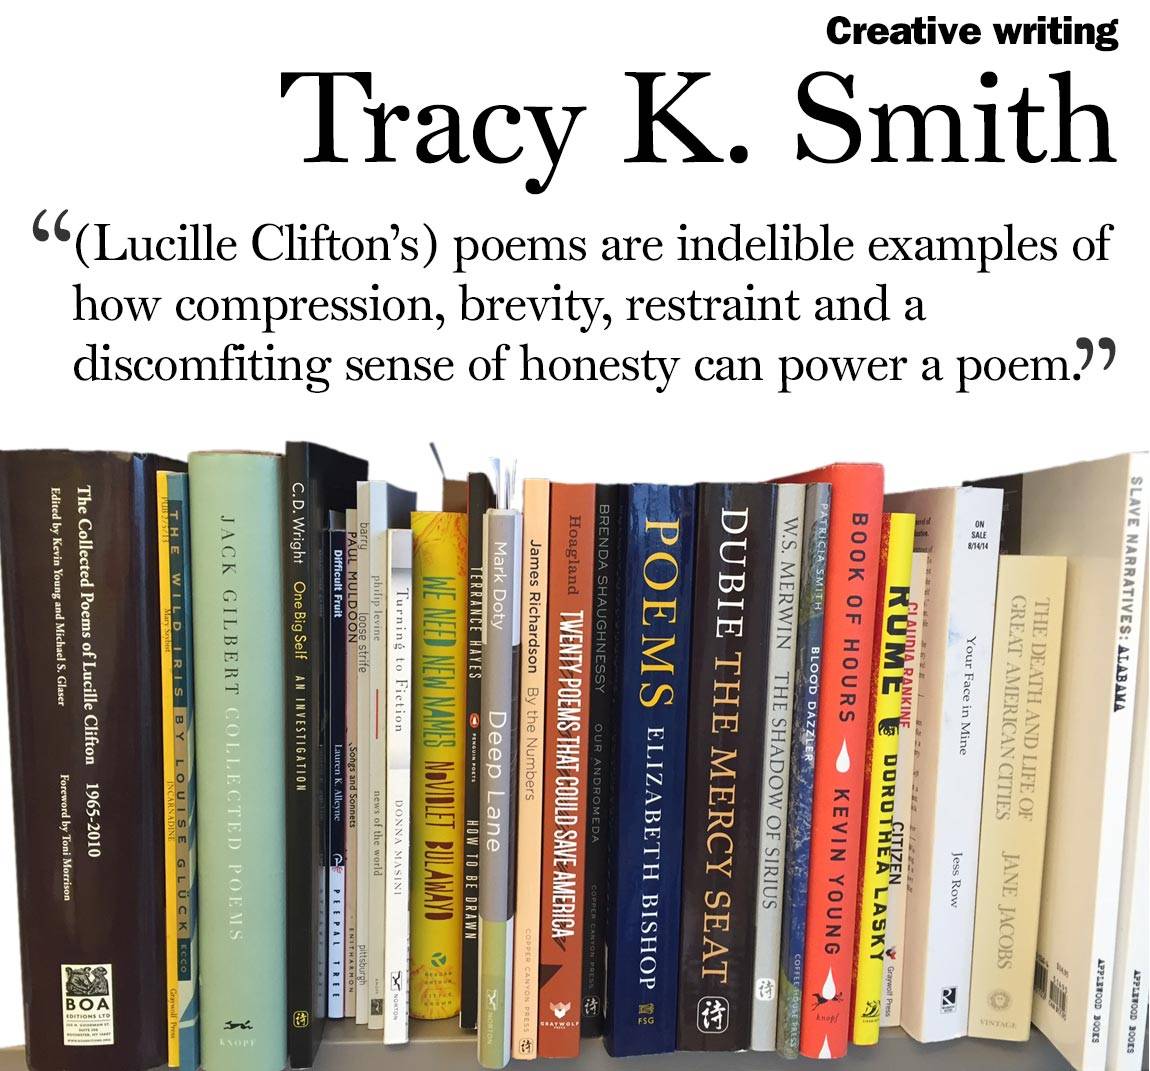 “(Lucille Clifton’s) poems are indelible examples of how compression, brevity, restraint and a discomfiting sense of honesty can power a poem.” Tracy K. Smith, creative writing